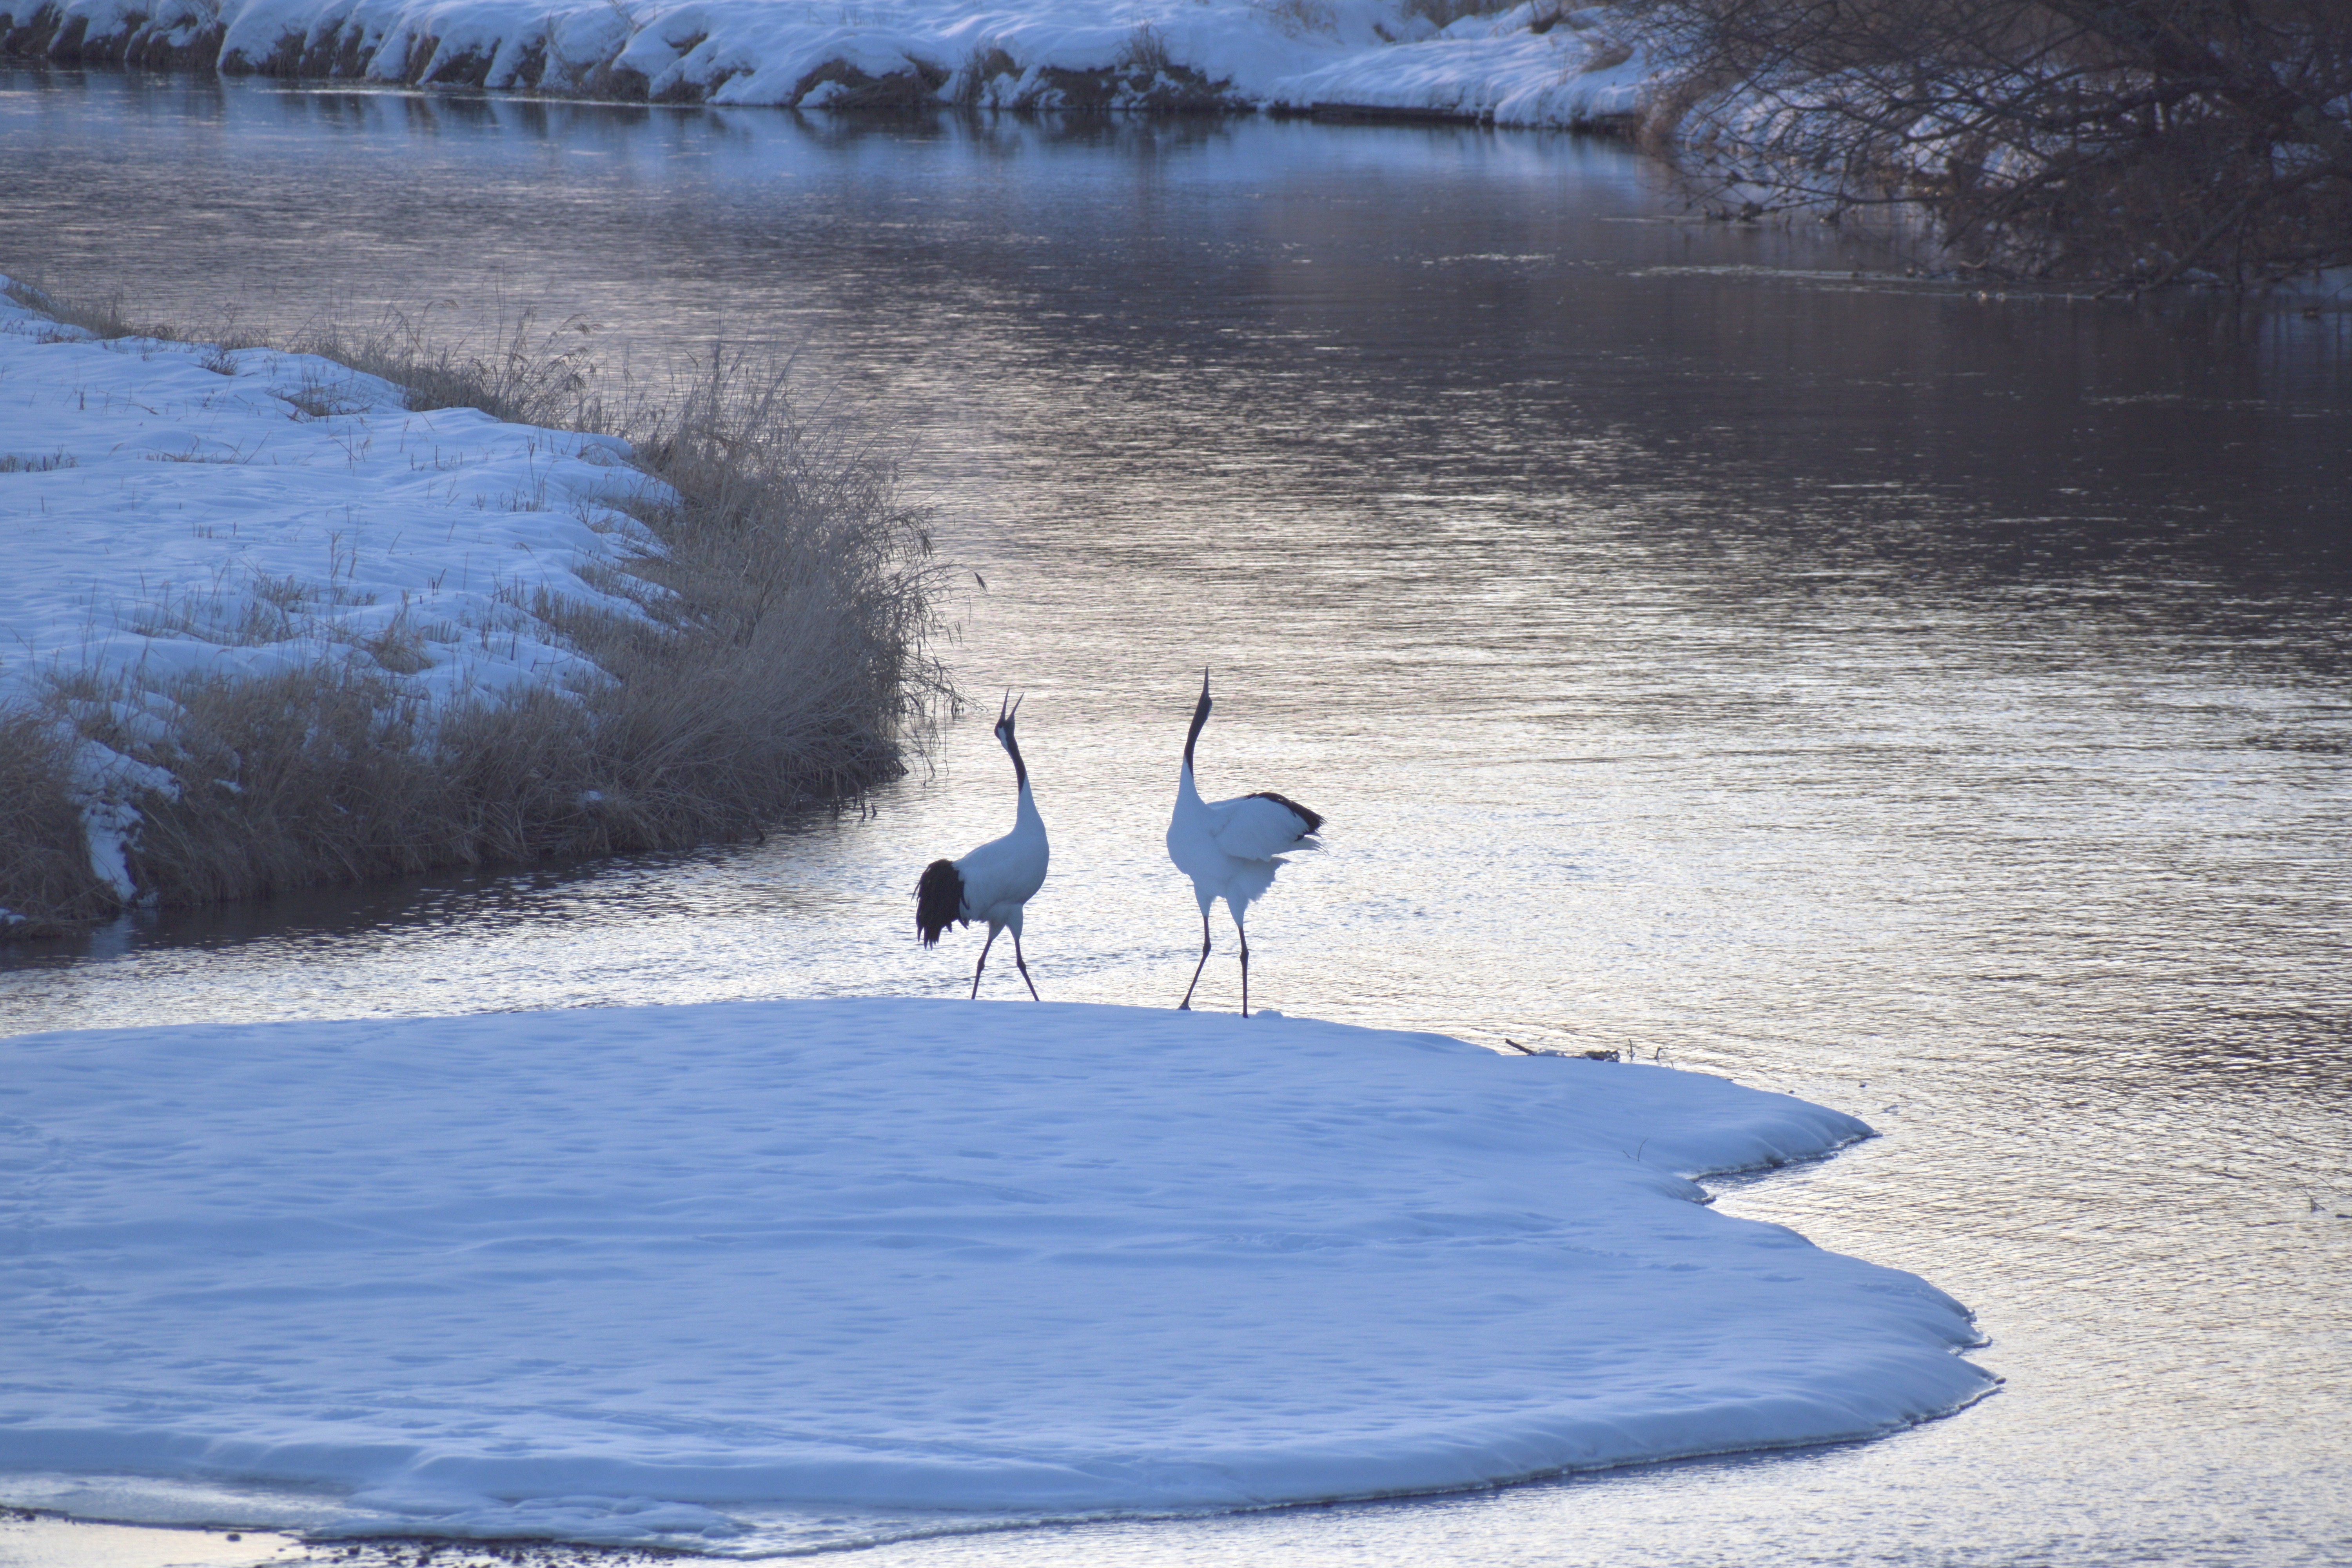 Two cranes in the freezing river at Otowa Bridge call out to the heavens.